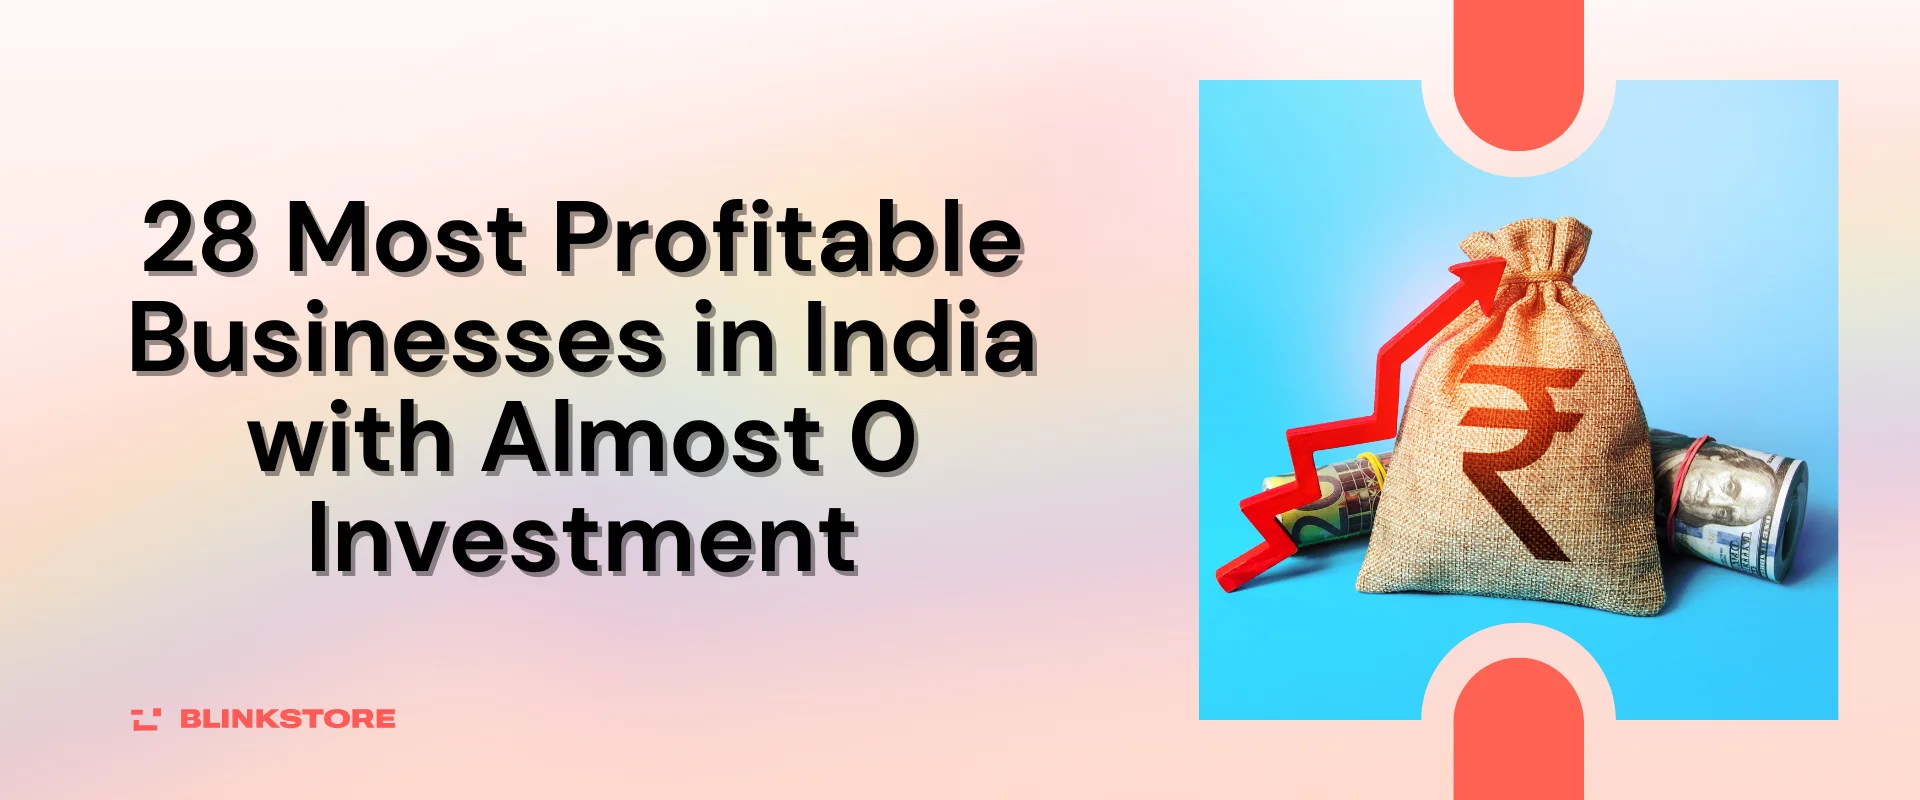 most profitable business in india